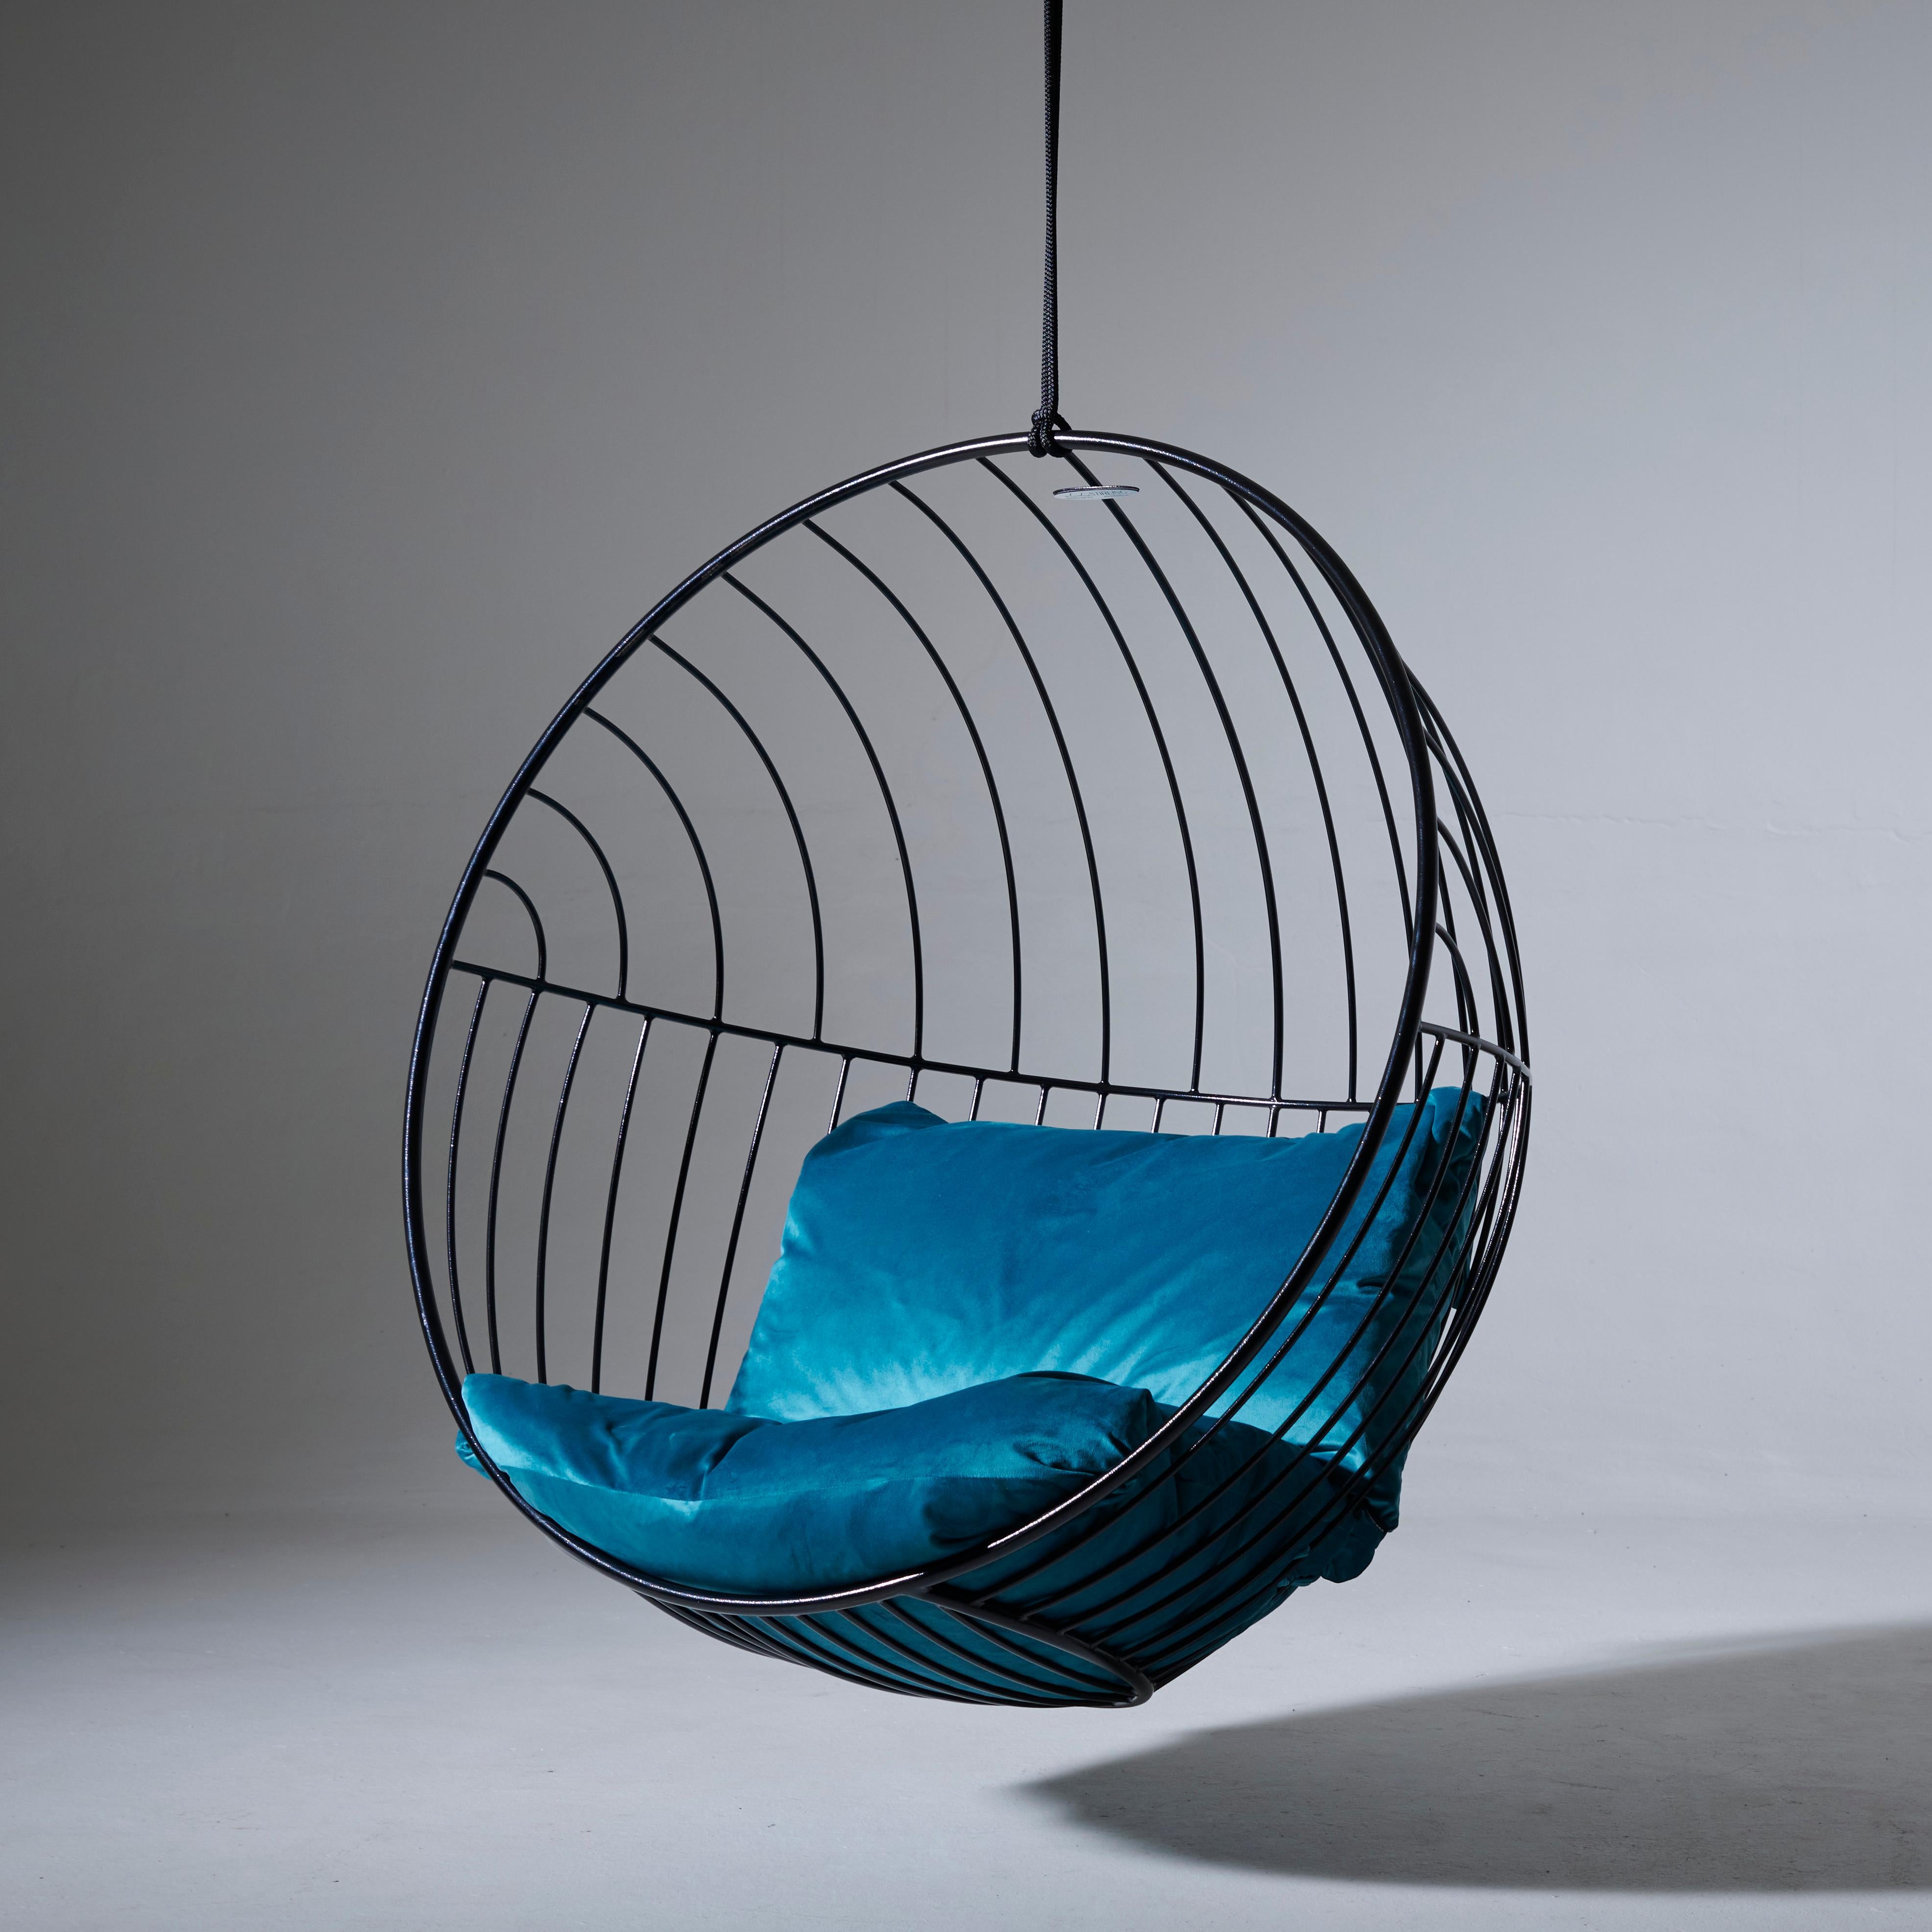 South African Modern, Minimal Indoor Swing made from Sturdy Steel and Powdercoated For Sale